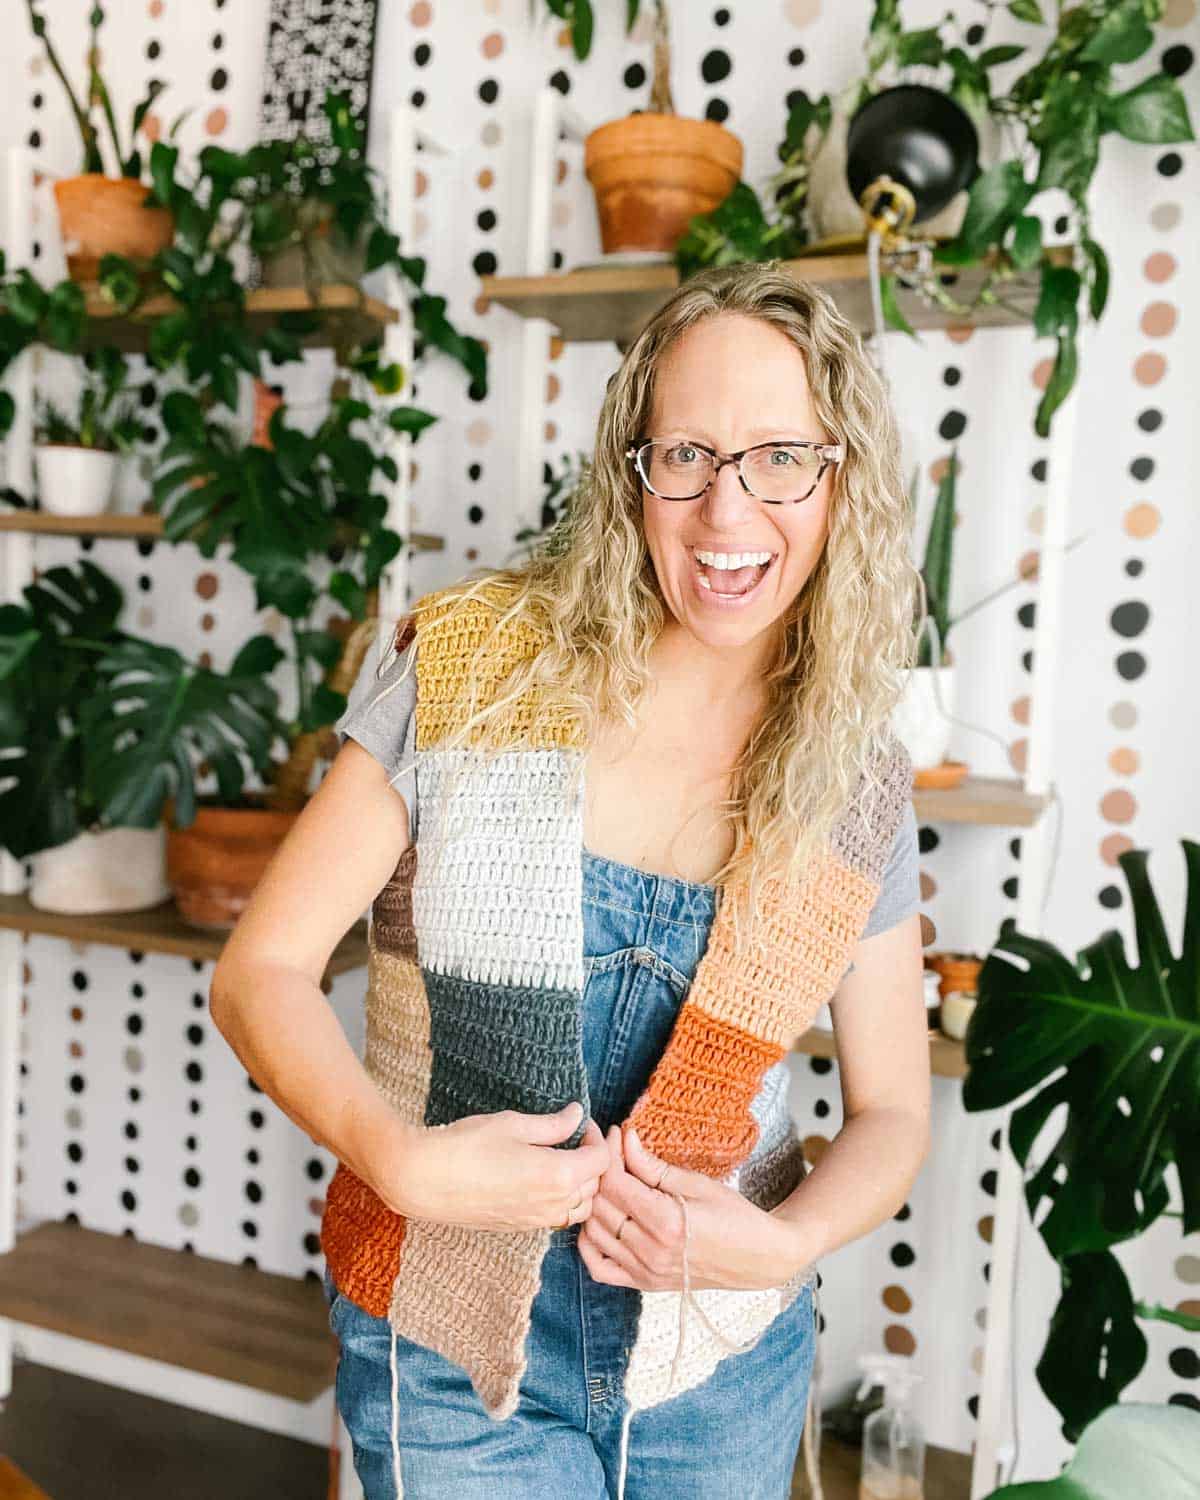 A blond woman with a large smile wearing a partially finished crochet patchwork sweater.